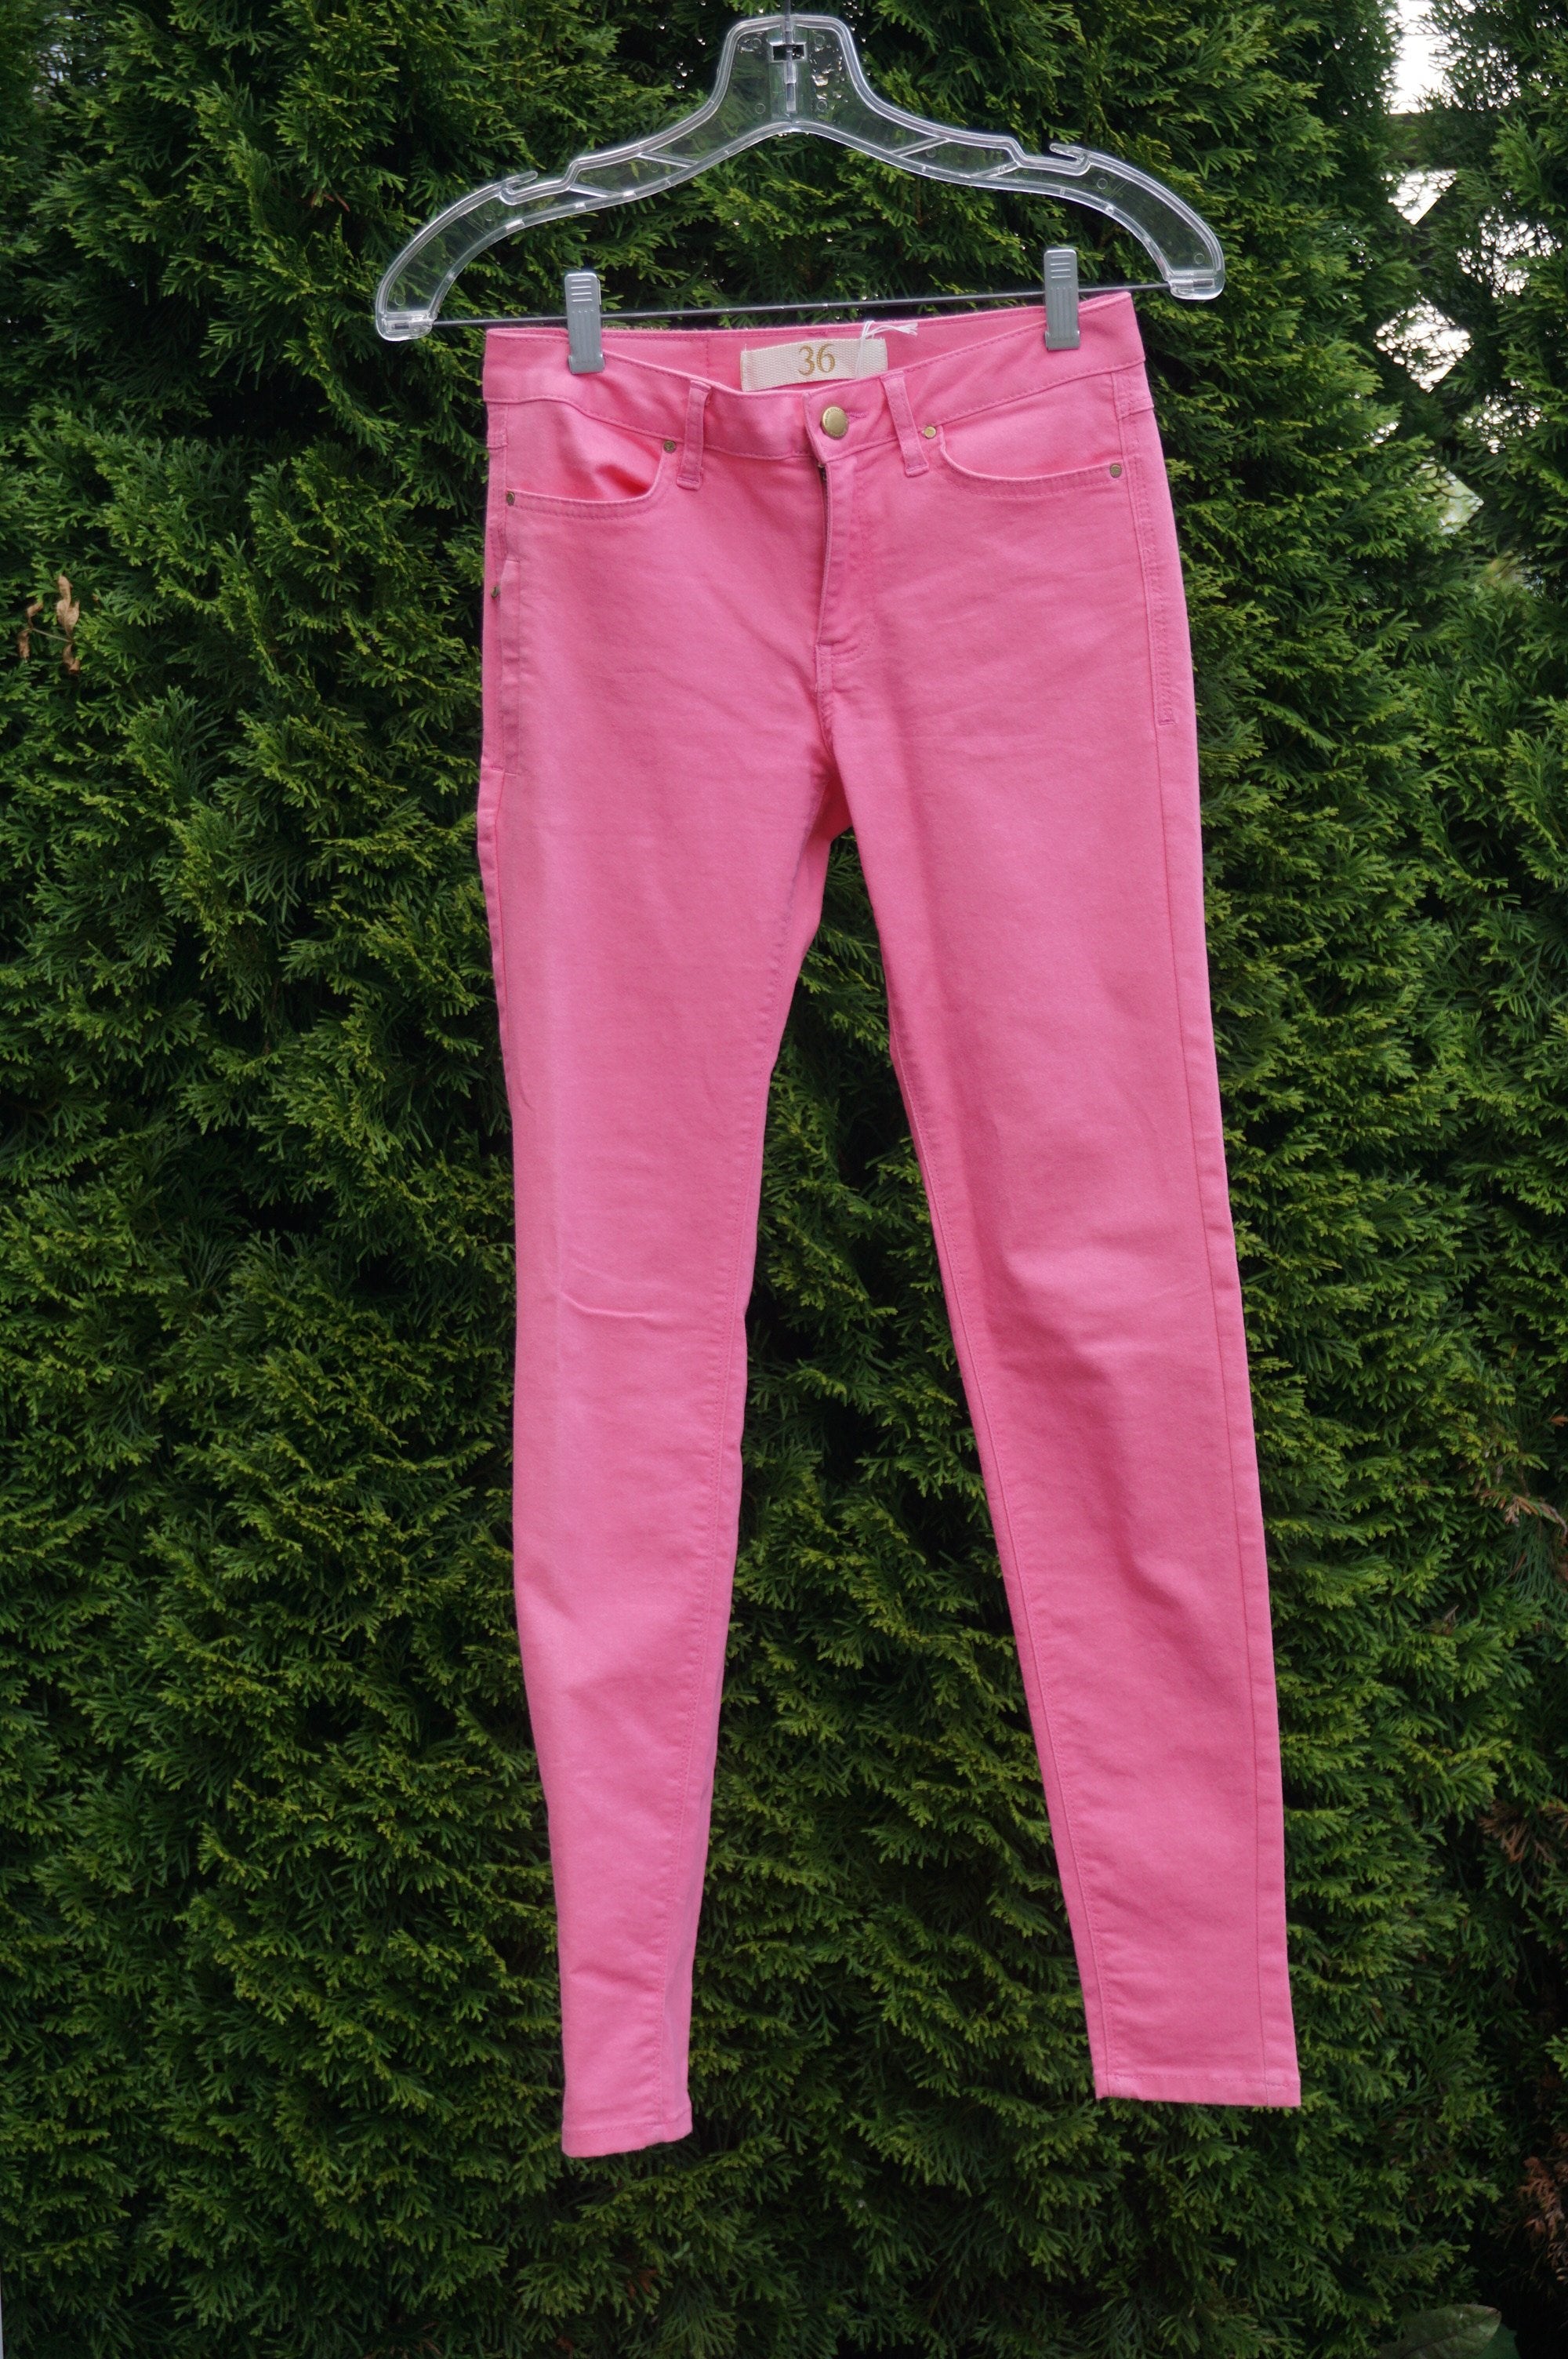 Zara Pink Stretchy Jeans, waist 26 inches, inseam 28, length 36. Stretchy, Pink, 69% Cotton. 27% Polyester, 4% Elastane, women's Pants, women's Pink Pants, Zara women's Pants, pink jeans, skinny jeans, stretchy jeans